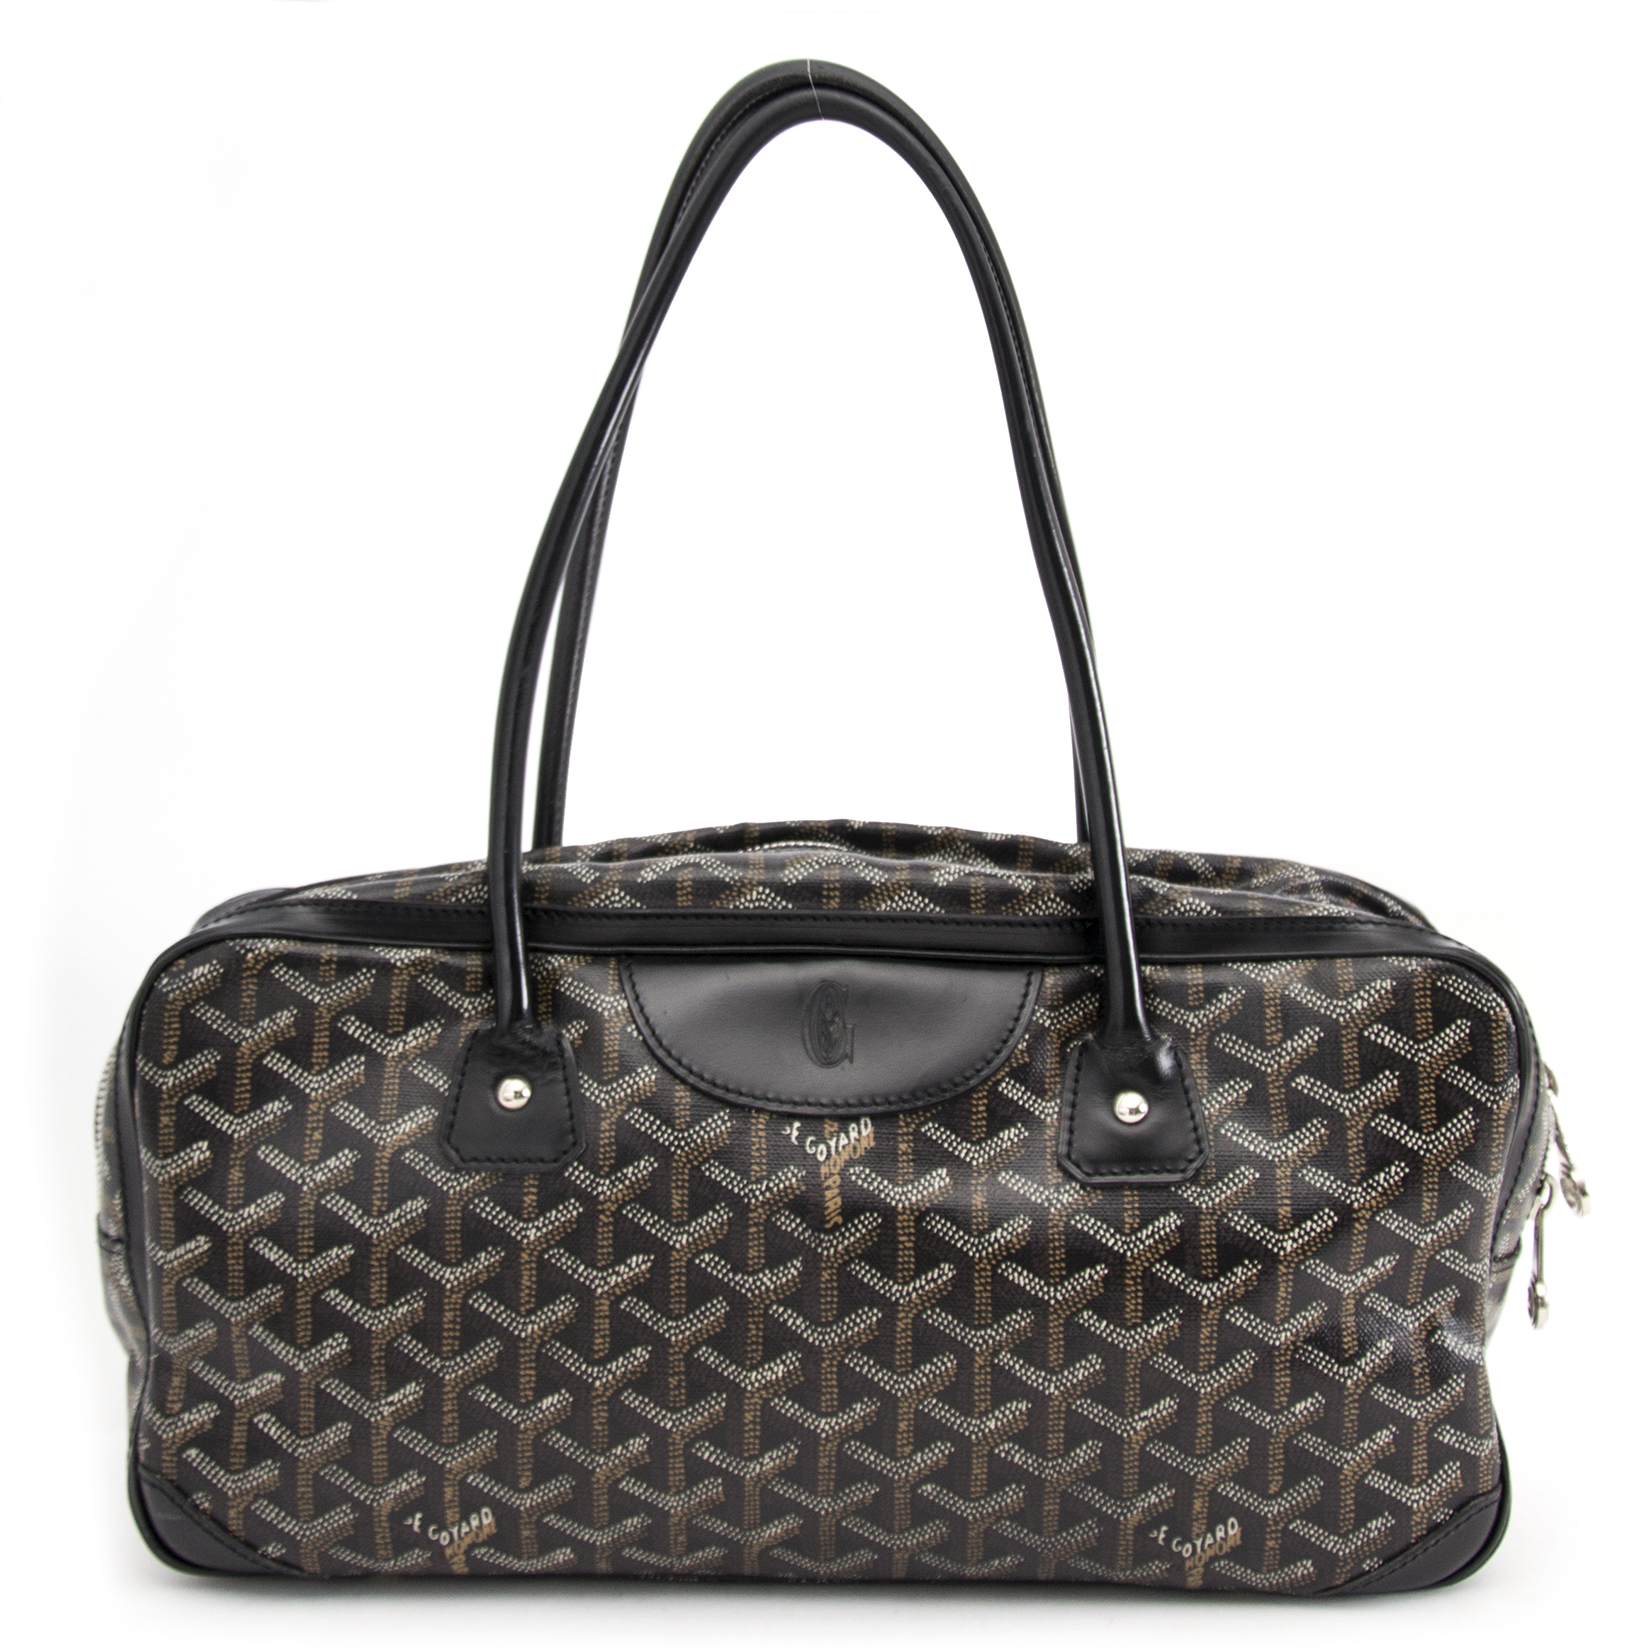 Goyard St. Martin Bag ○ Labellov ○ Buy and Sell Authentic Luxury